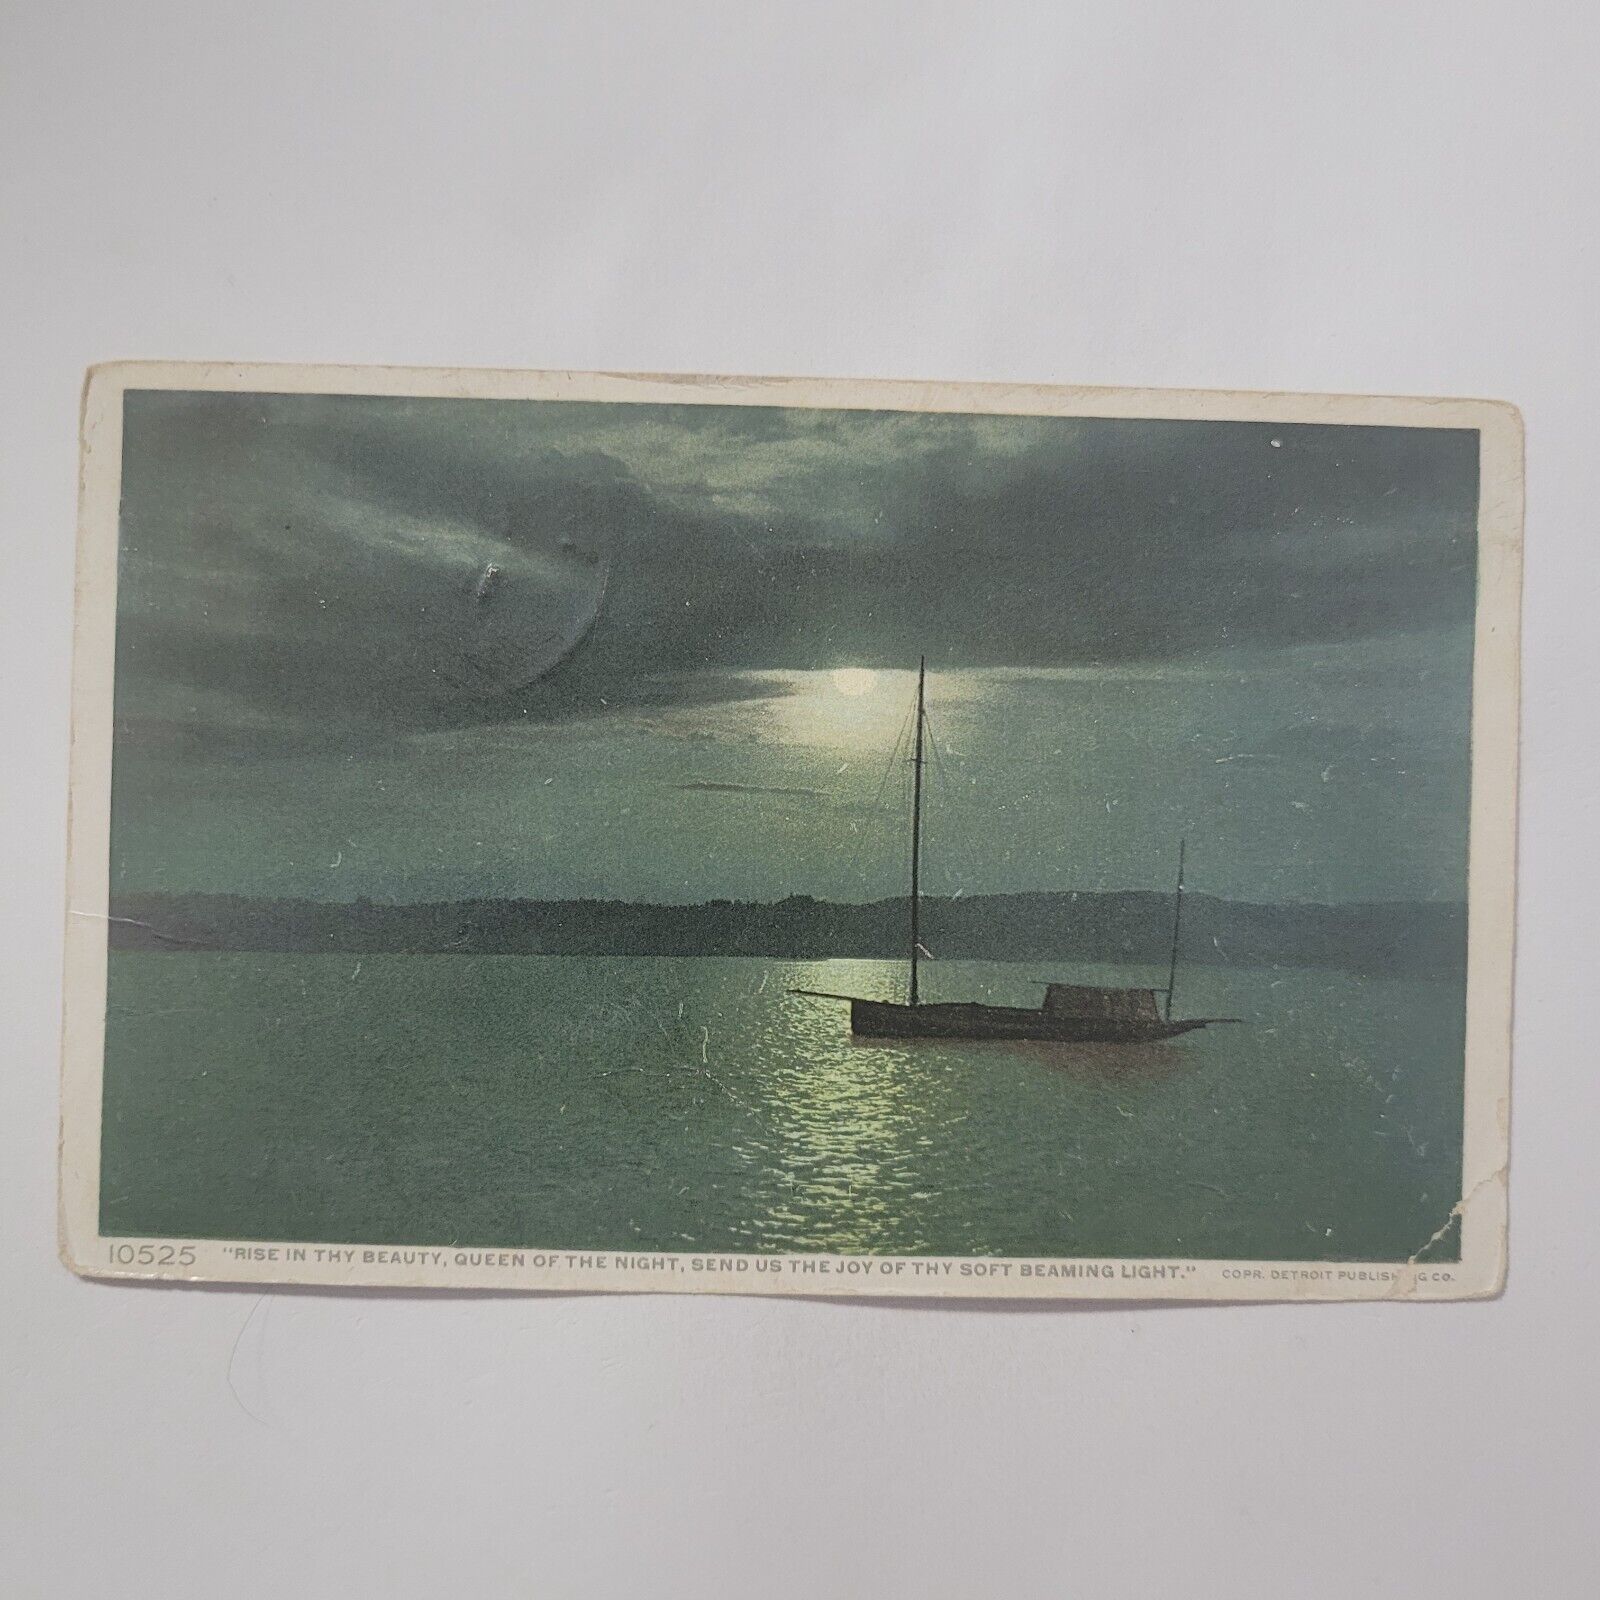 Moonlight Boat On Water Clouds In The Sky Soft Beaming Light Vintage Postcard